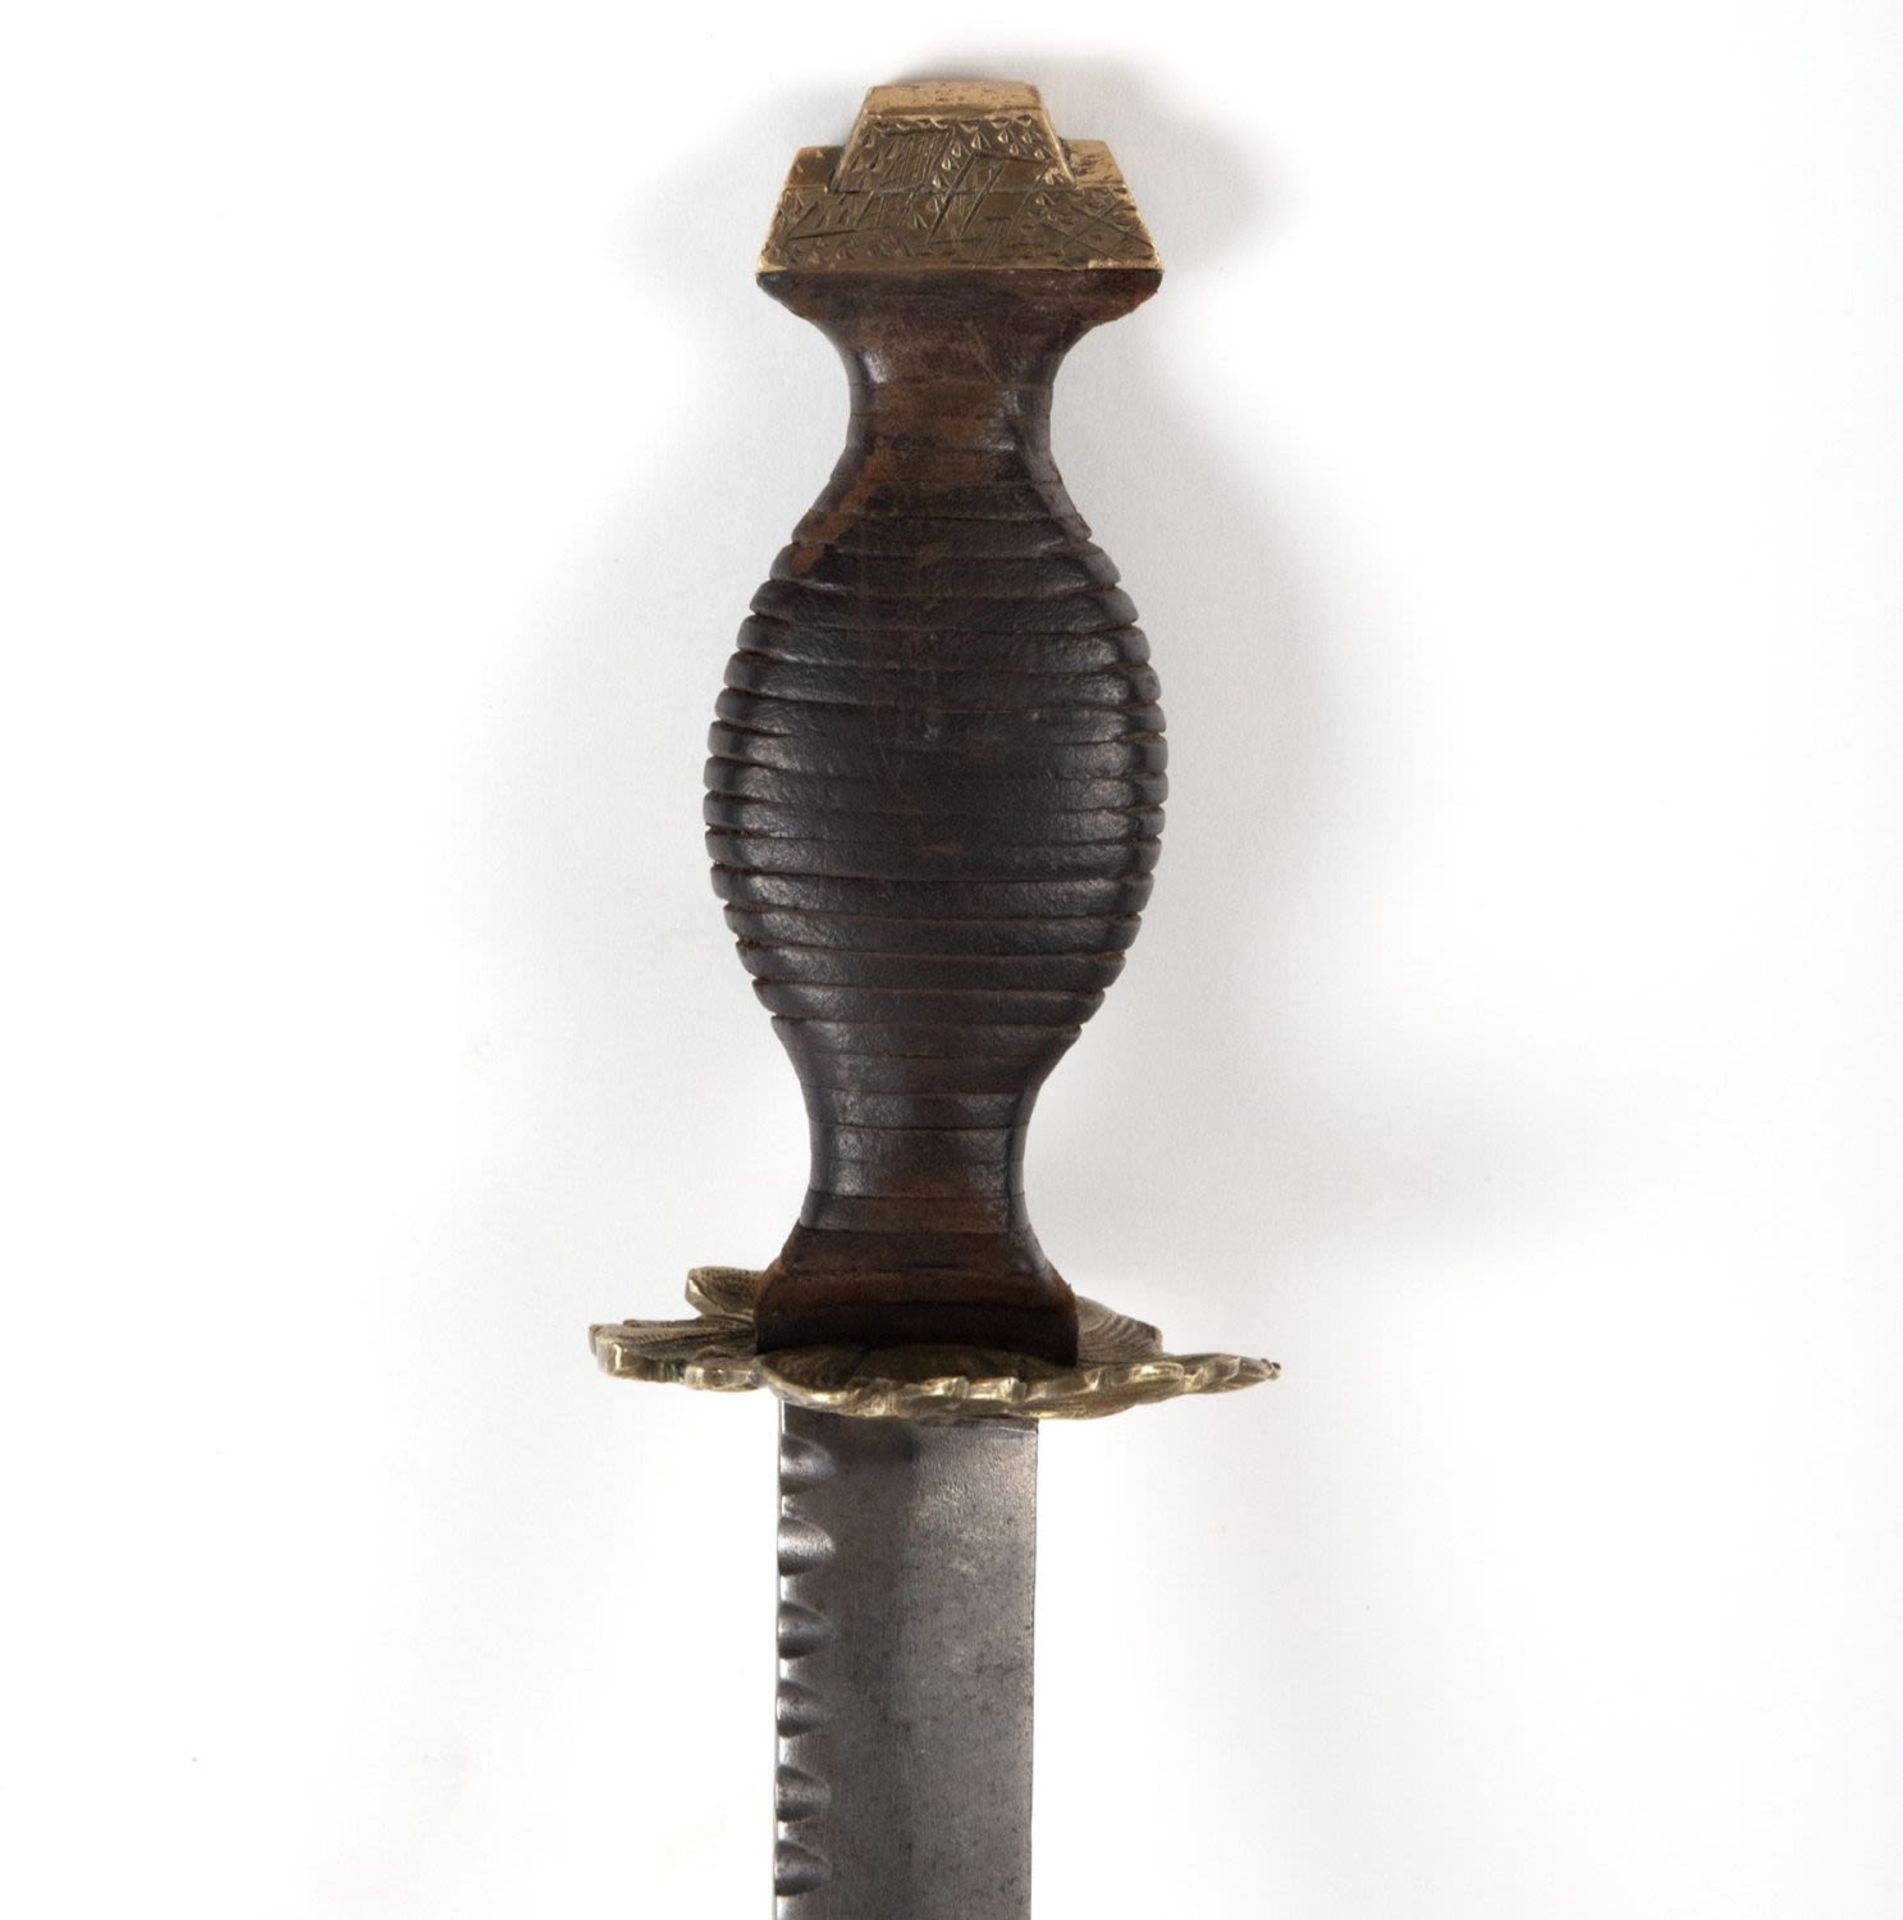 Oriental dagger with handle in Bronze and Wood, 18th century - Image 3 of 4